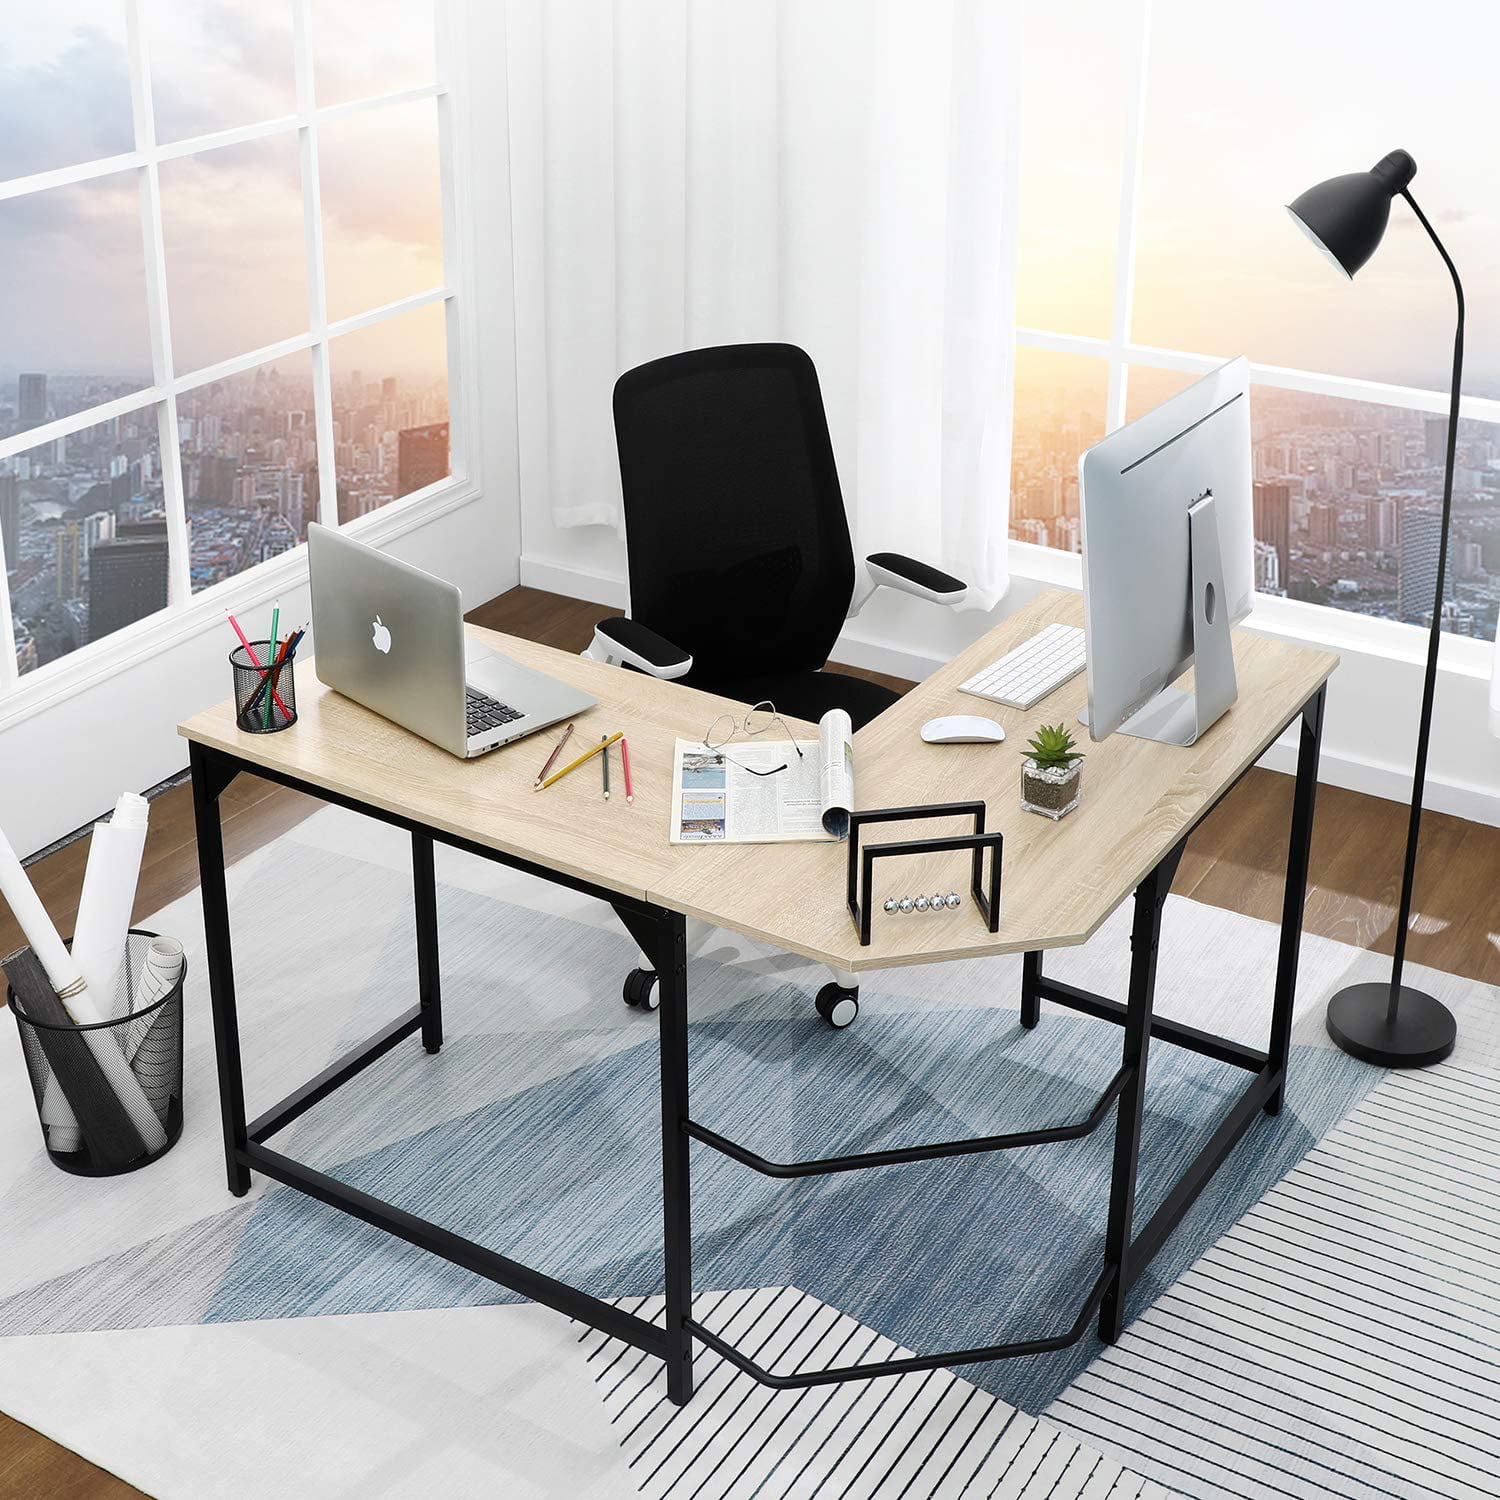 Beech Metal and Wood Corner Homy Casa Inc L Shaped Industrial Writing Workstation Table for Home Office Study Computer Desk